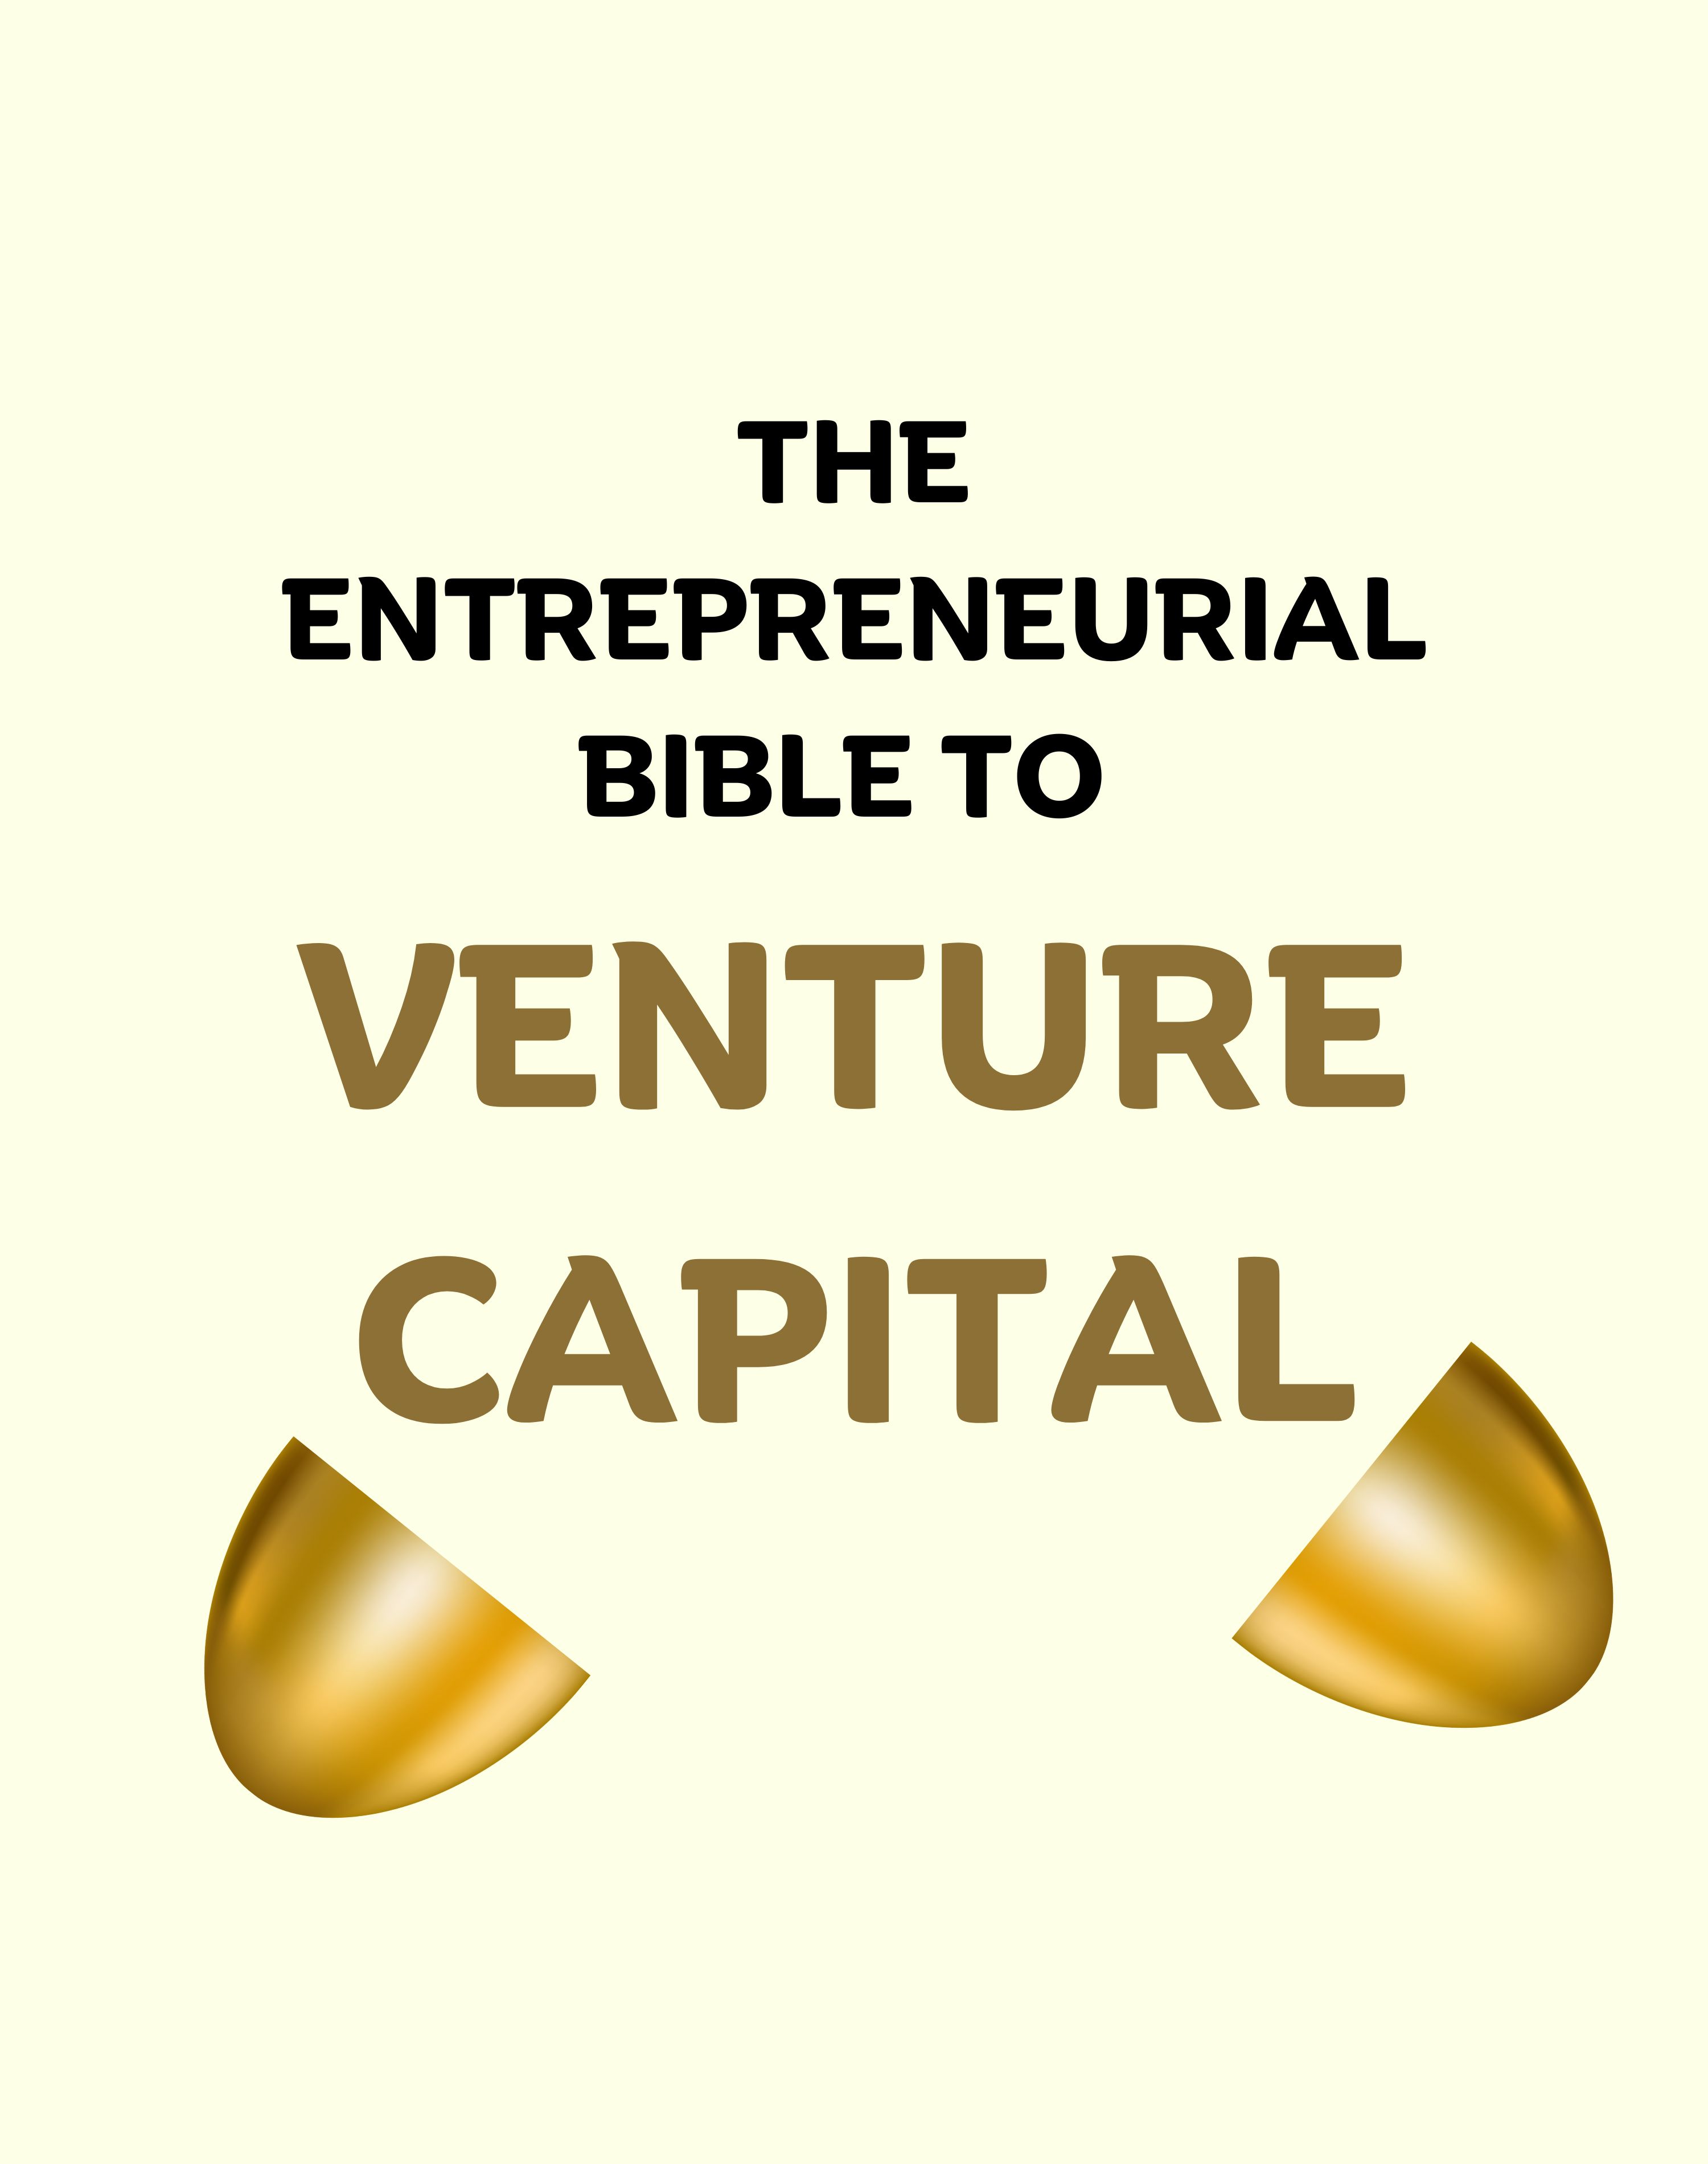  THE ENTREPRENEURIAL BIBLE TO VENTURE CAPITAL: Inside Secrets  from the Leaders in the Startup Game: 9780071830355: Romans, Andrew: Books